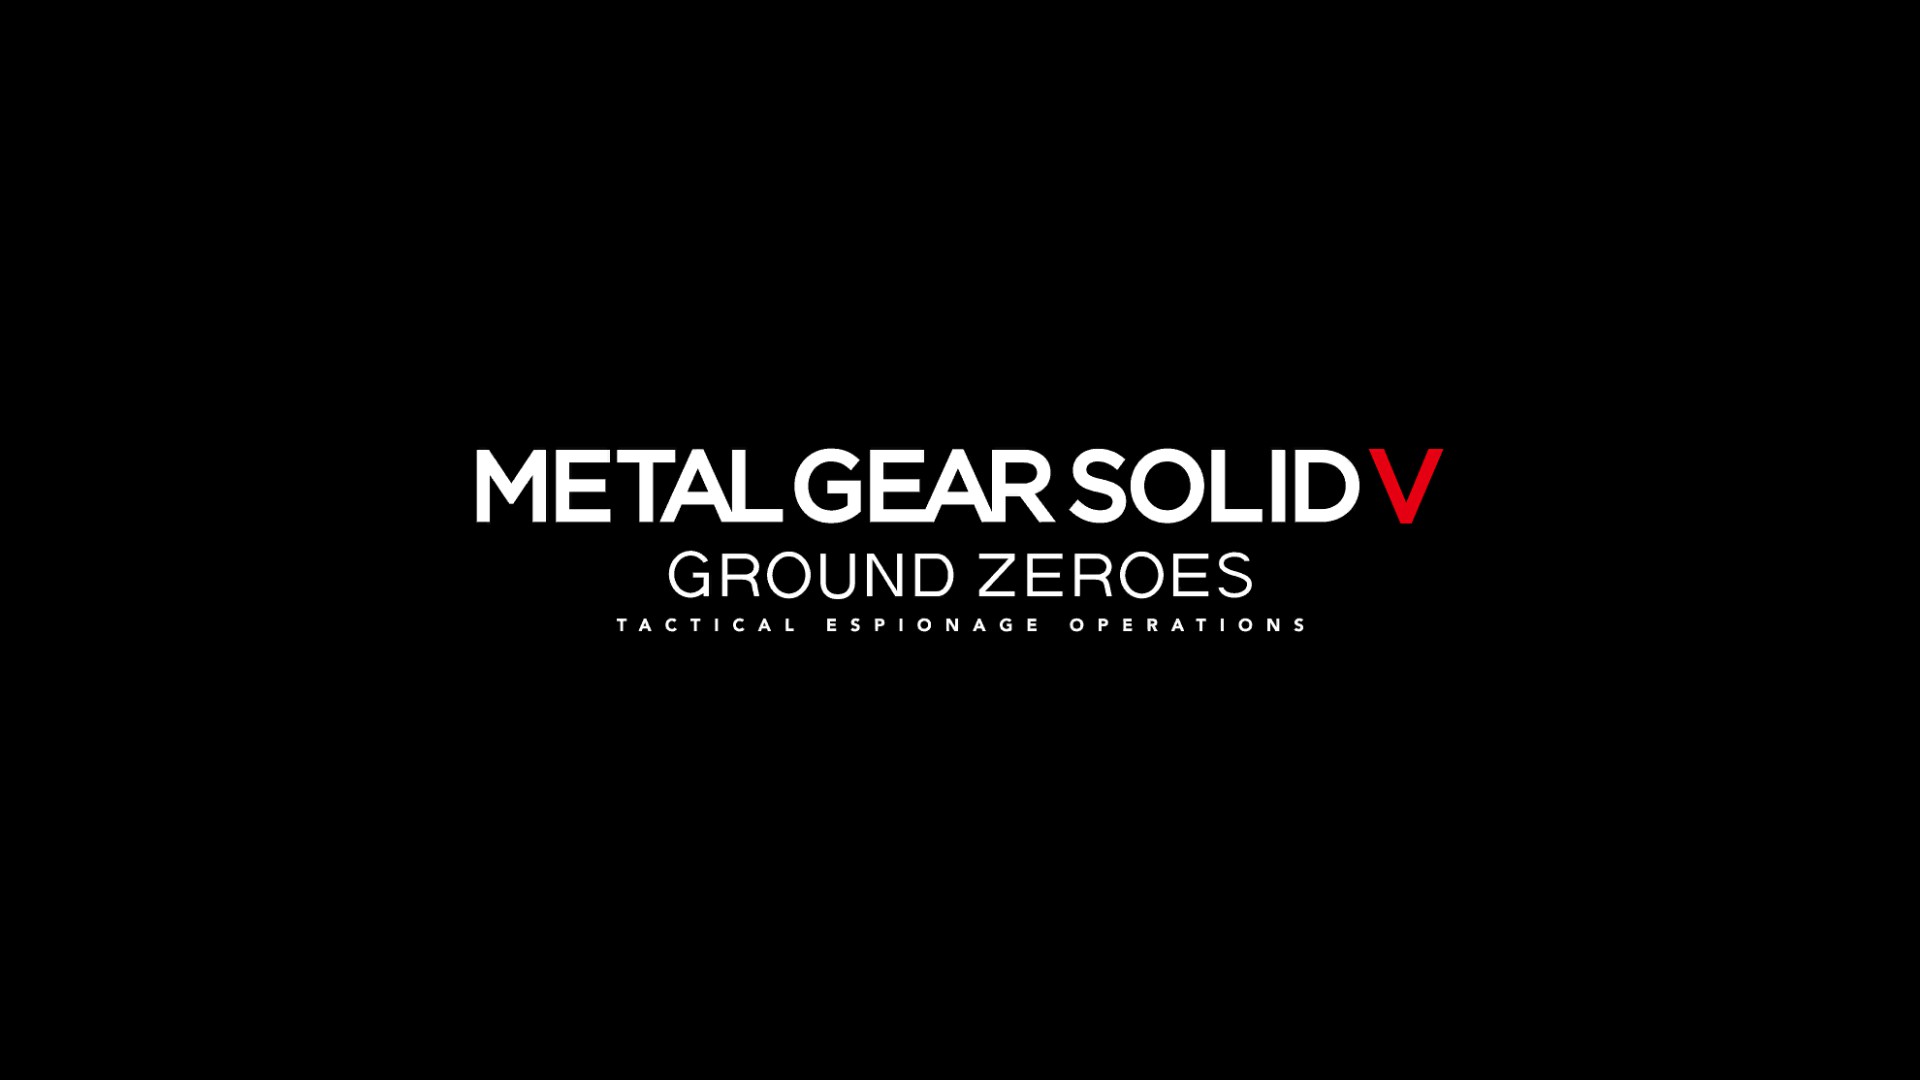 Let’s Play Metal Gear Solid V: Ground Zeroes